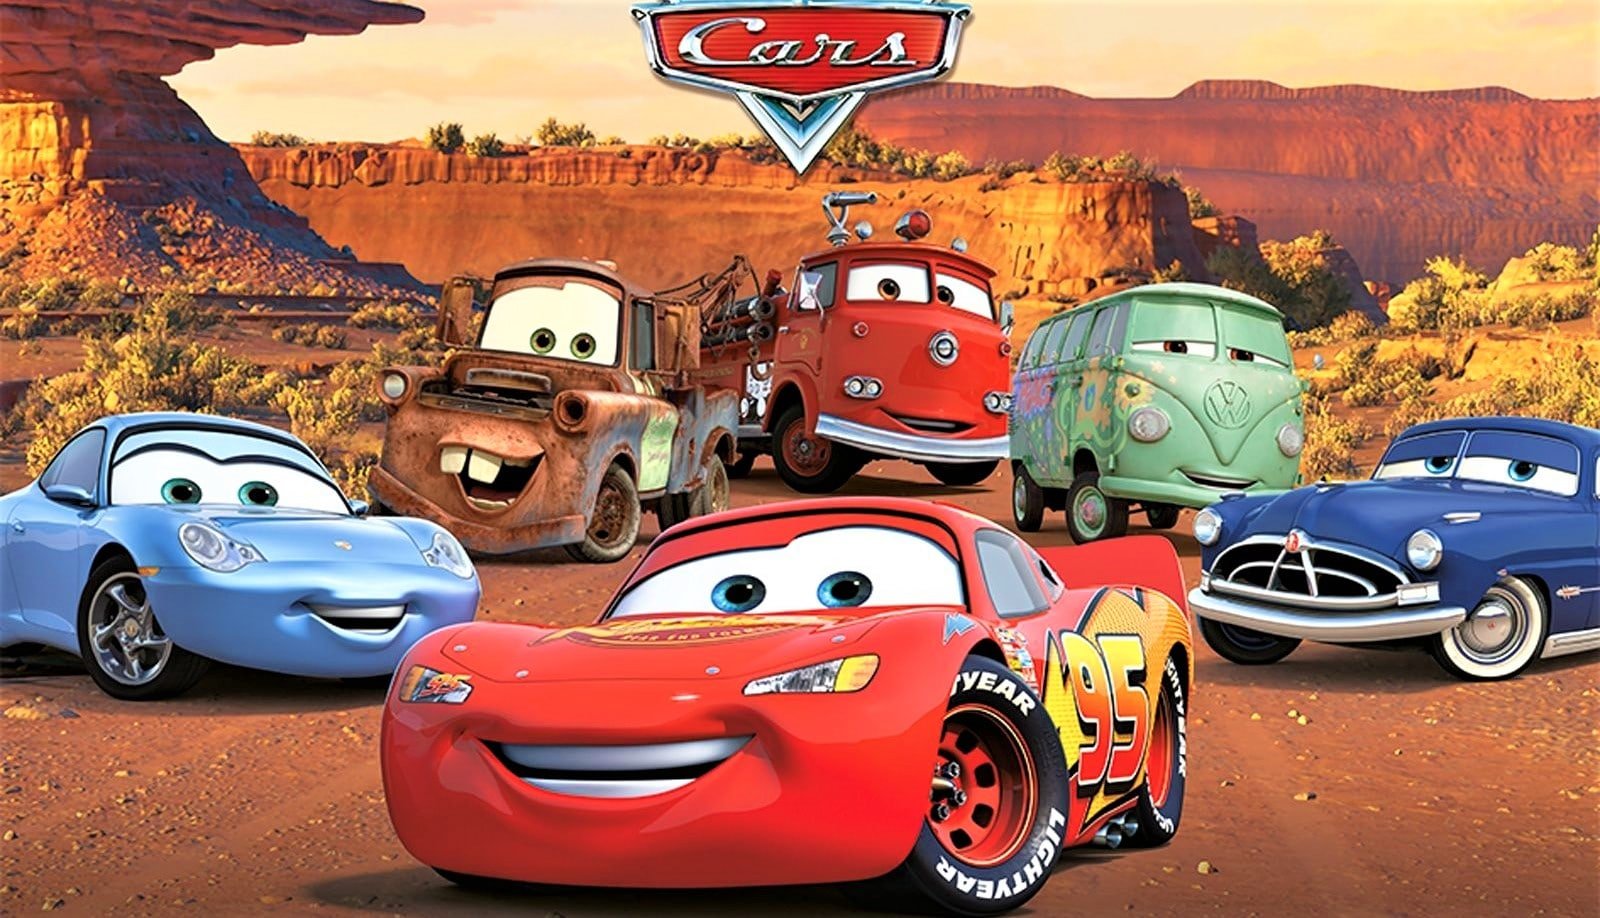 44-facts-about-the-movie-cars